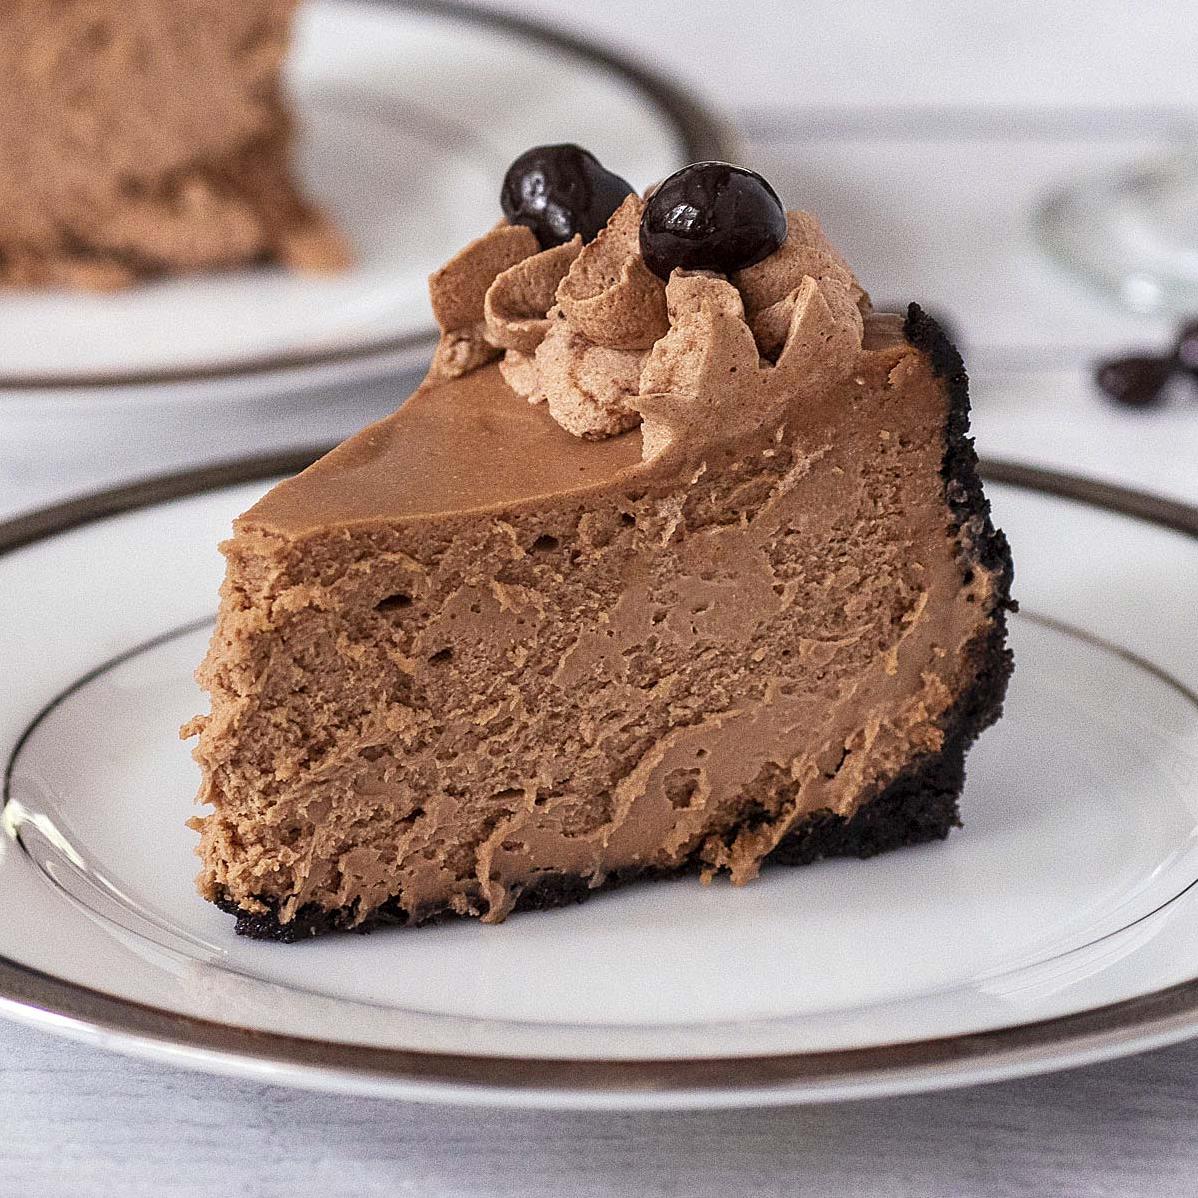  Give in to indulgence with this heavenly mocha-chocolate cheesecake